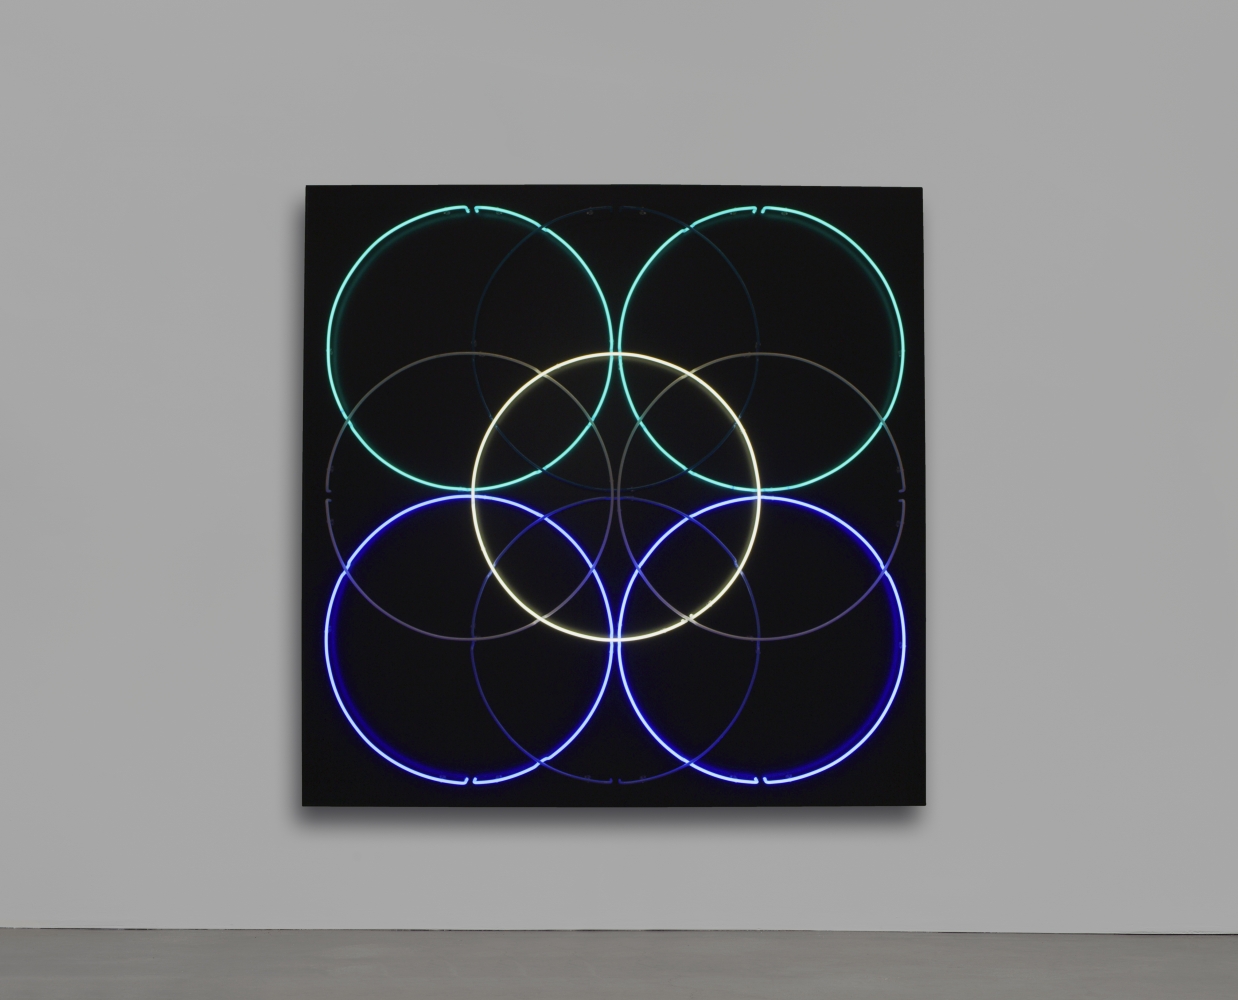 Doug Aitken

Not yet titled

2019

Neon, wood

82 x 82 x 6 1/2 inches (208.3 x 208.3 x 16.5 cm)

Edition&amp;nbsp;of 4, with 2 AP

DA 618

&amp;nbsp;

INQUIRE